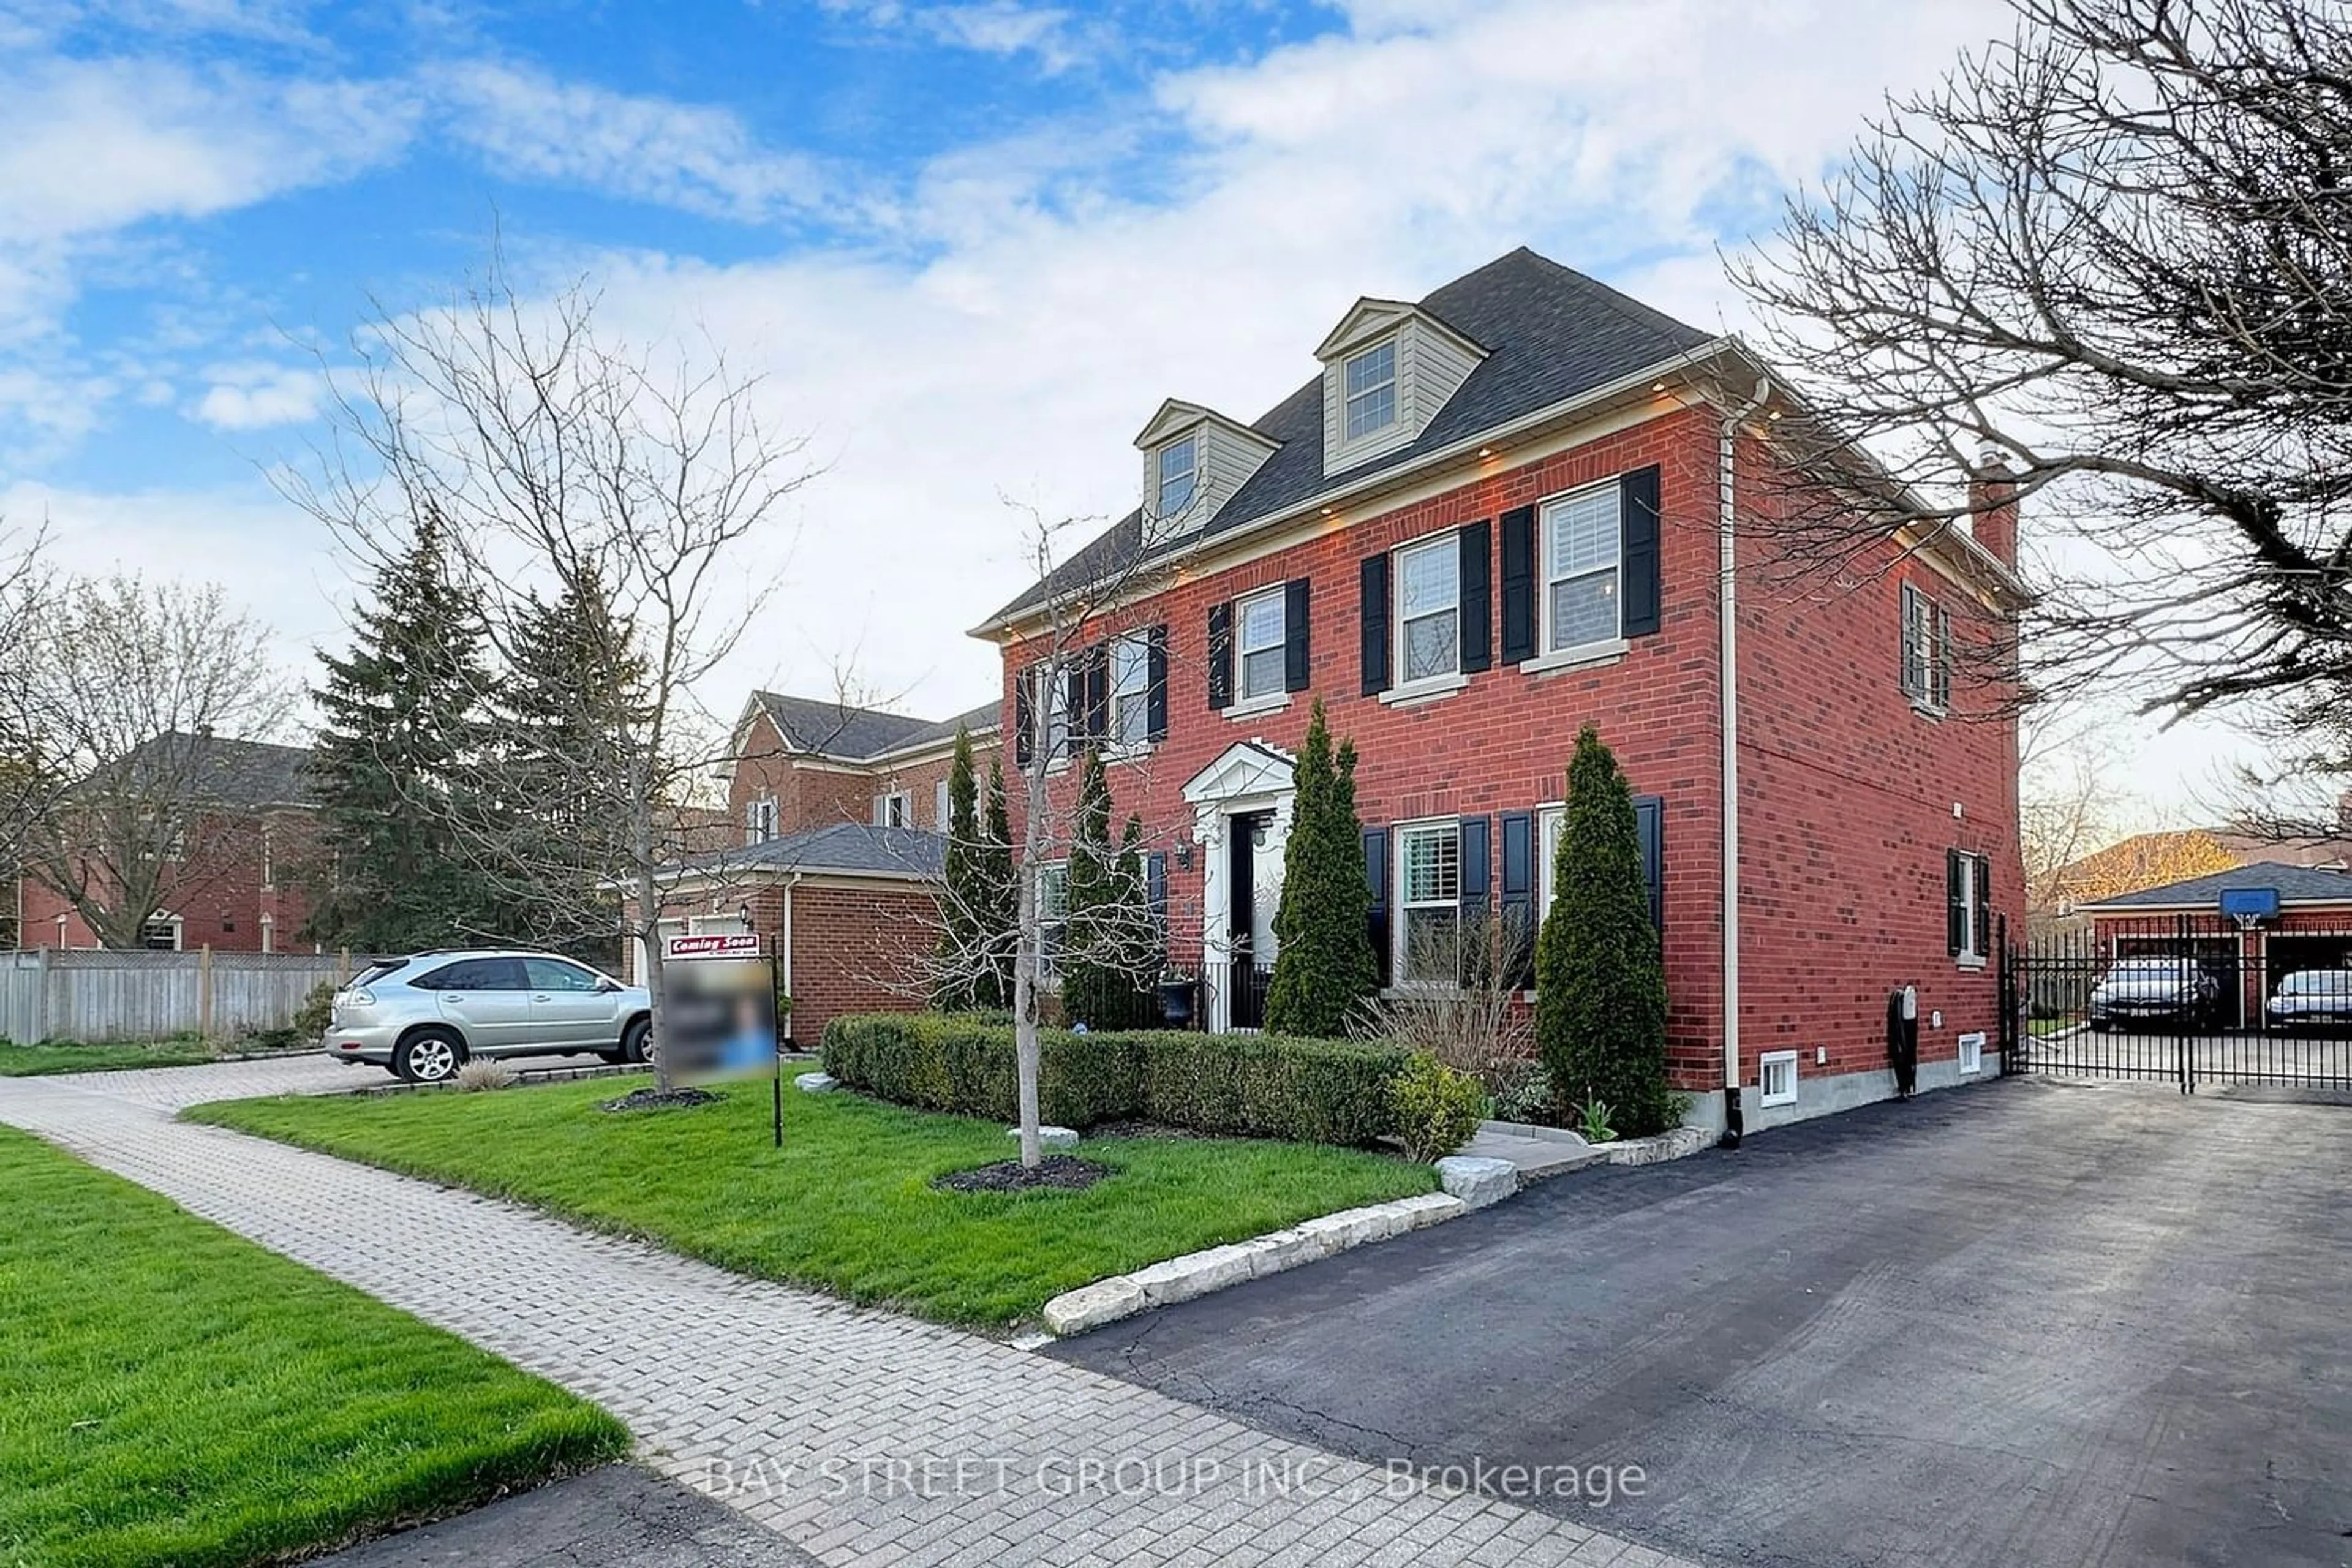 Home with brick exterior material for 58 Regent St, Richmond Hill Ontario L4C 9C3